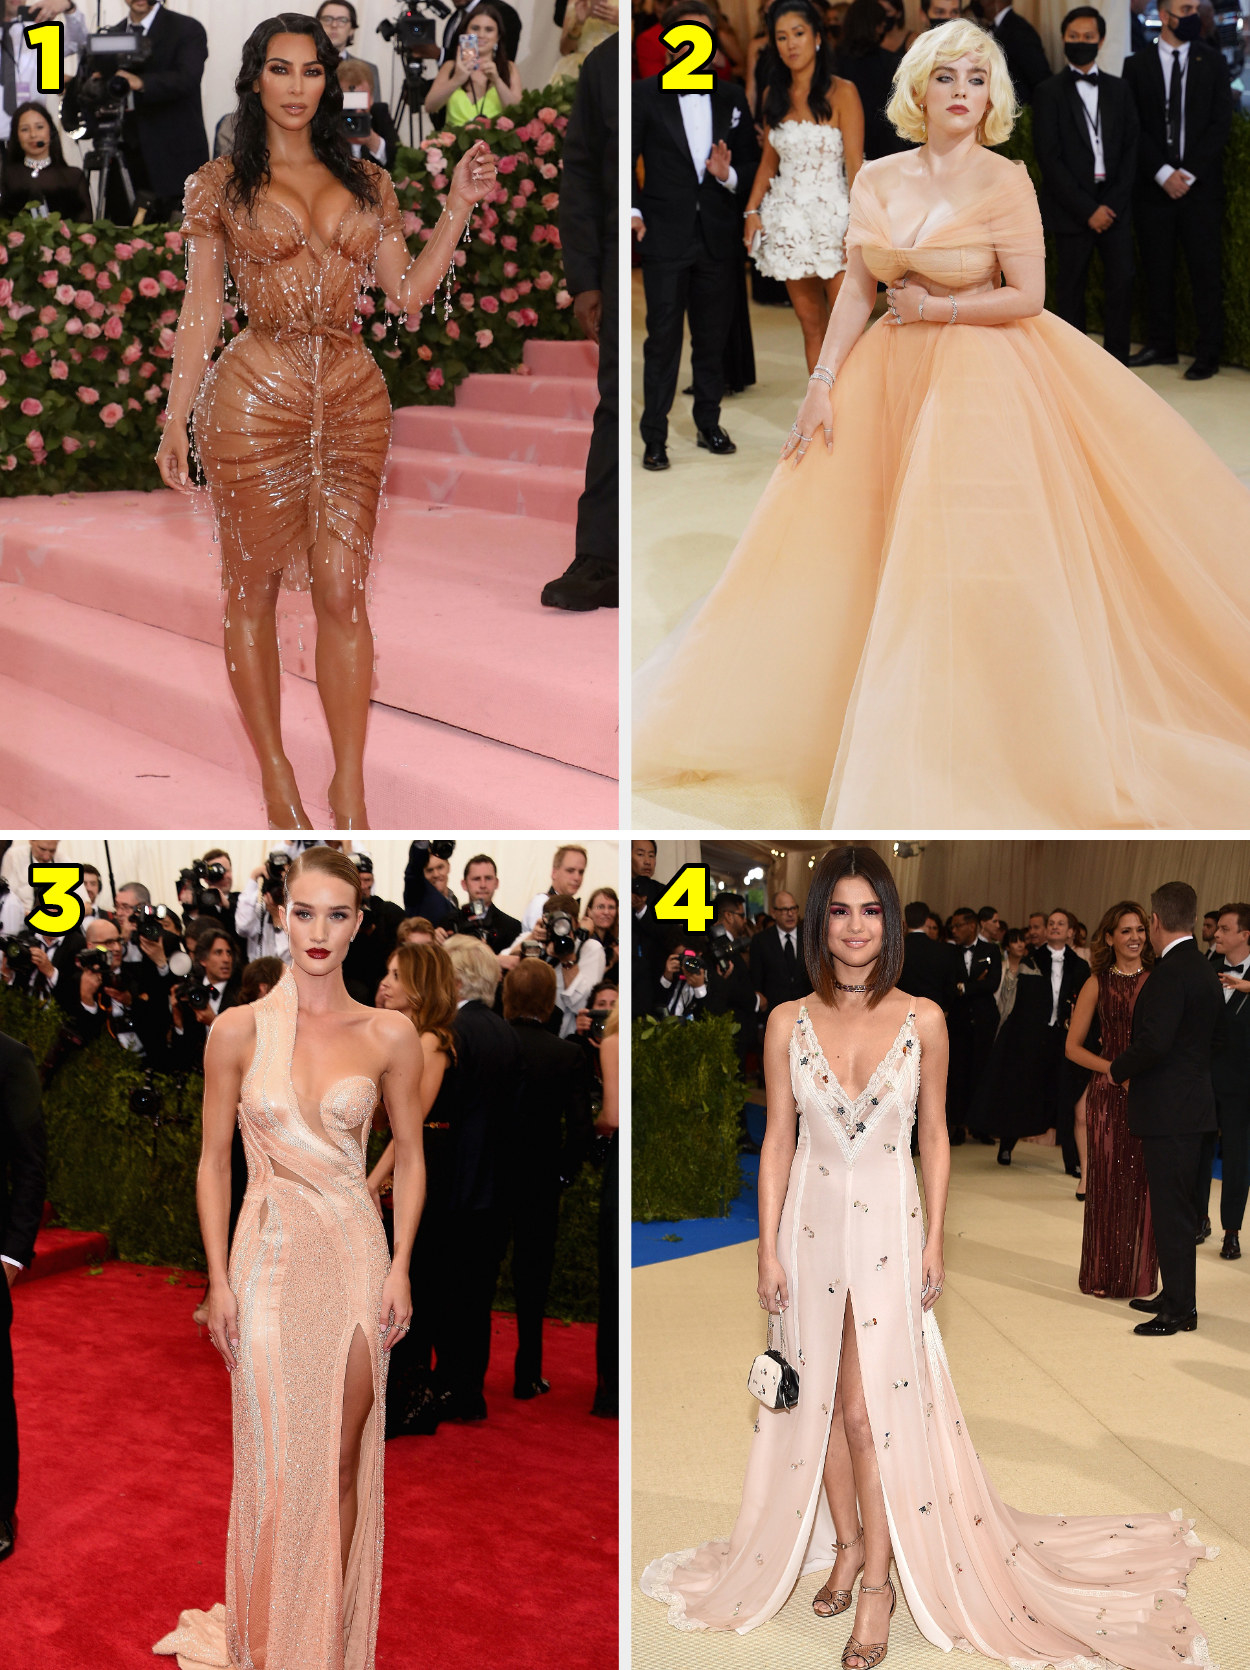 1. A corsetted gown that looks wet. 2. A flowing off the shoulder ballgown. 3. A one shouldered gown with a thigh slit. 4. A V-neck gown with a slit in the middle and appliques.